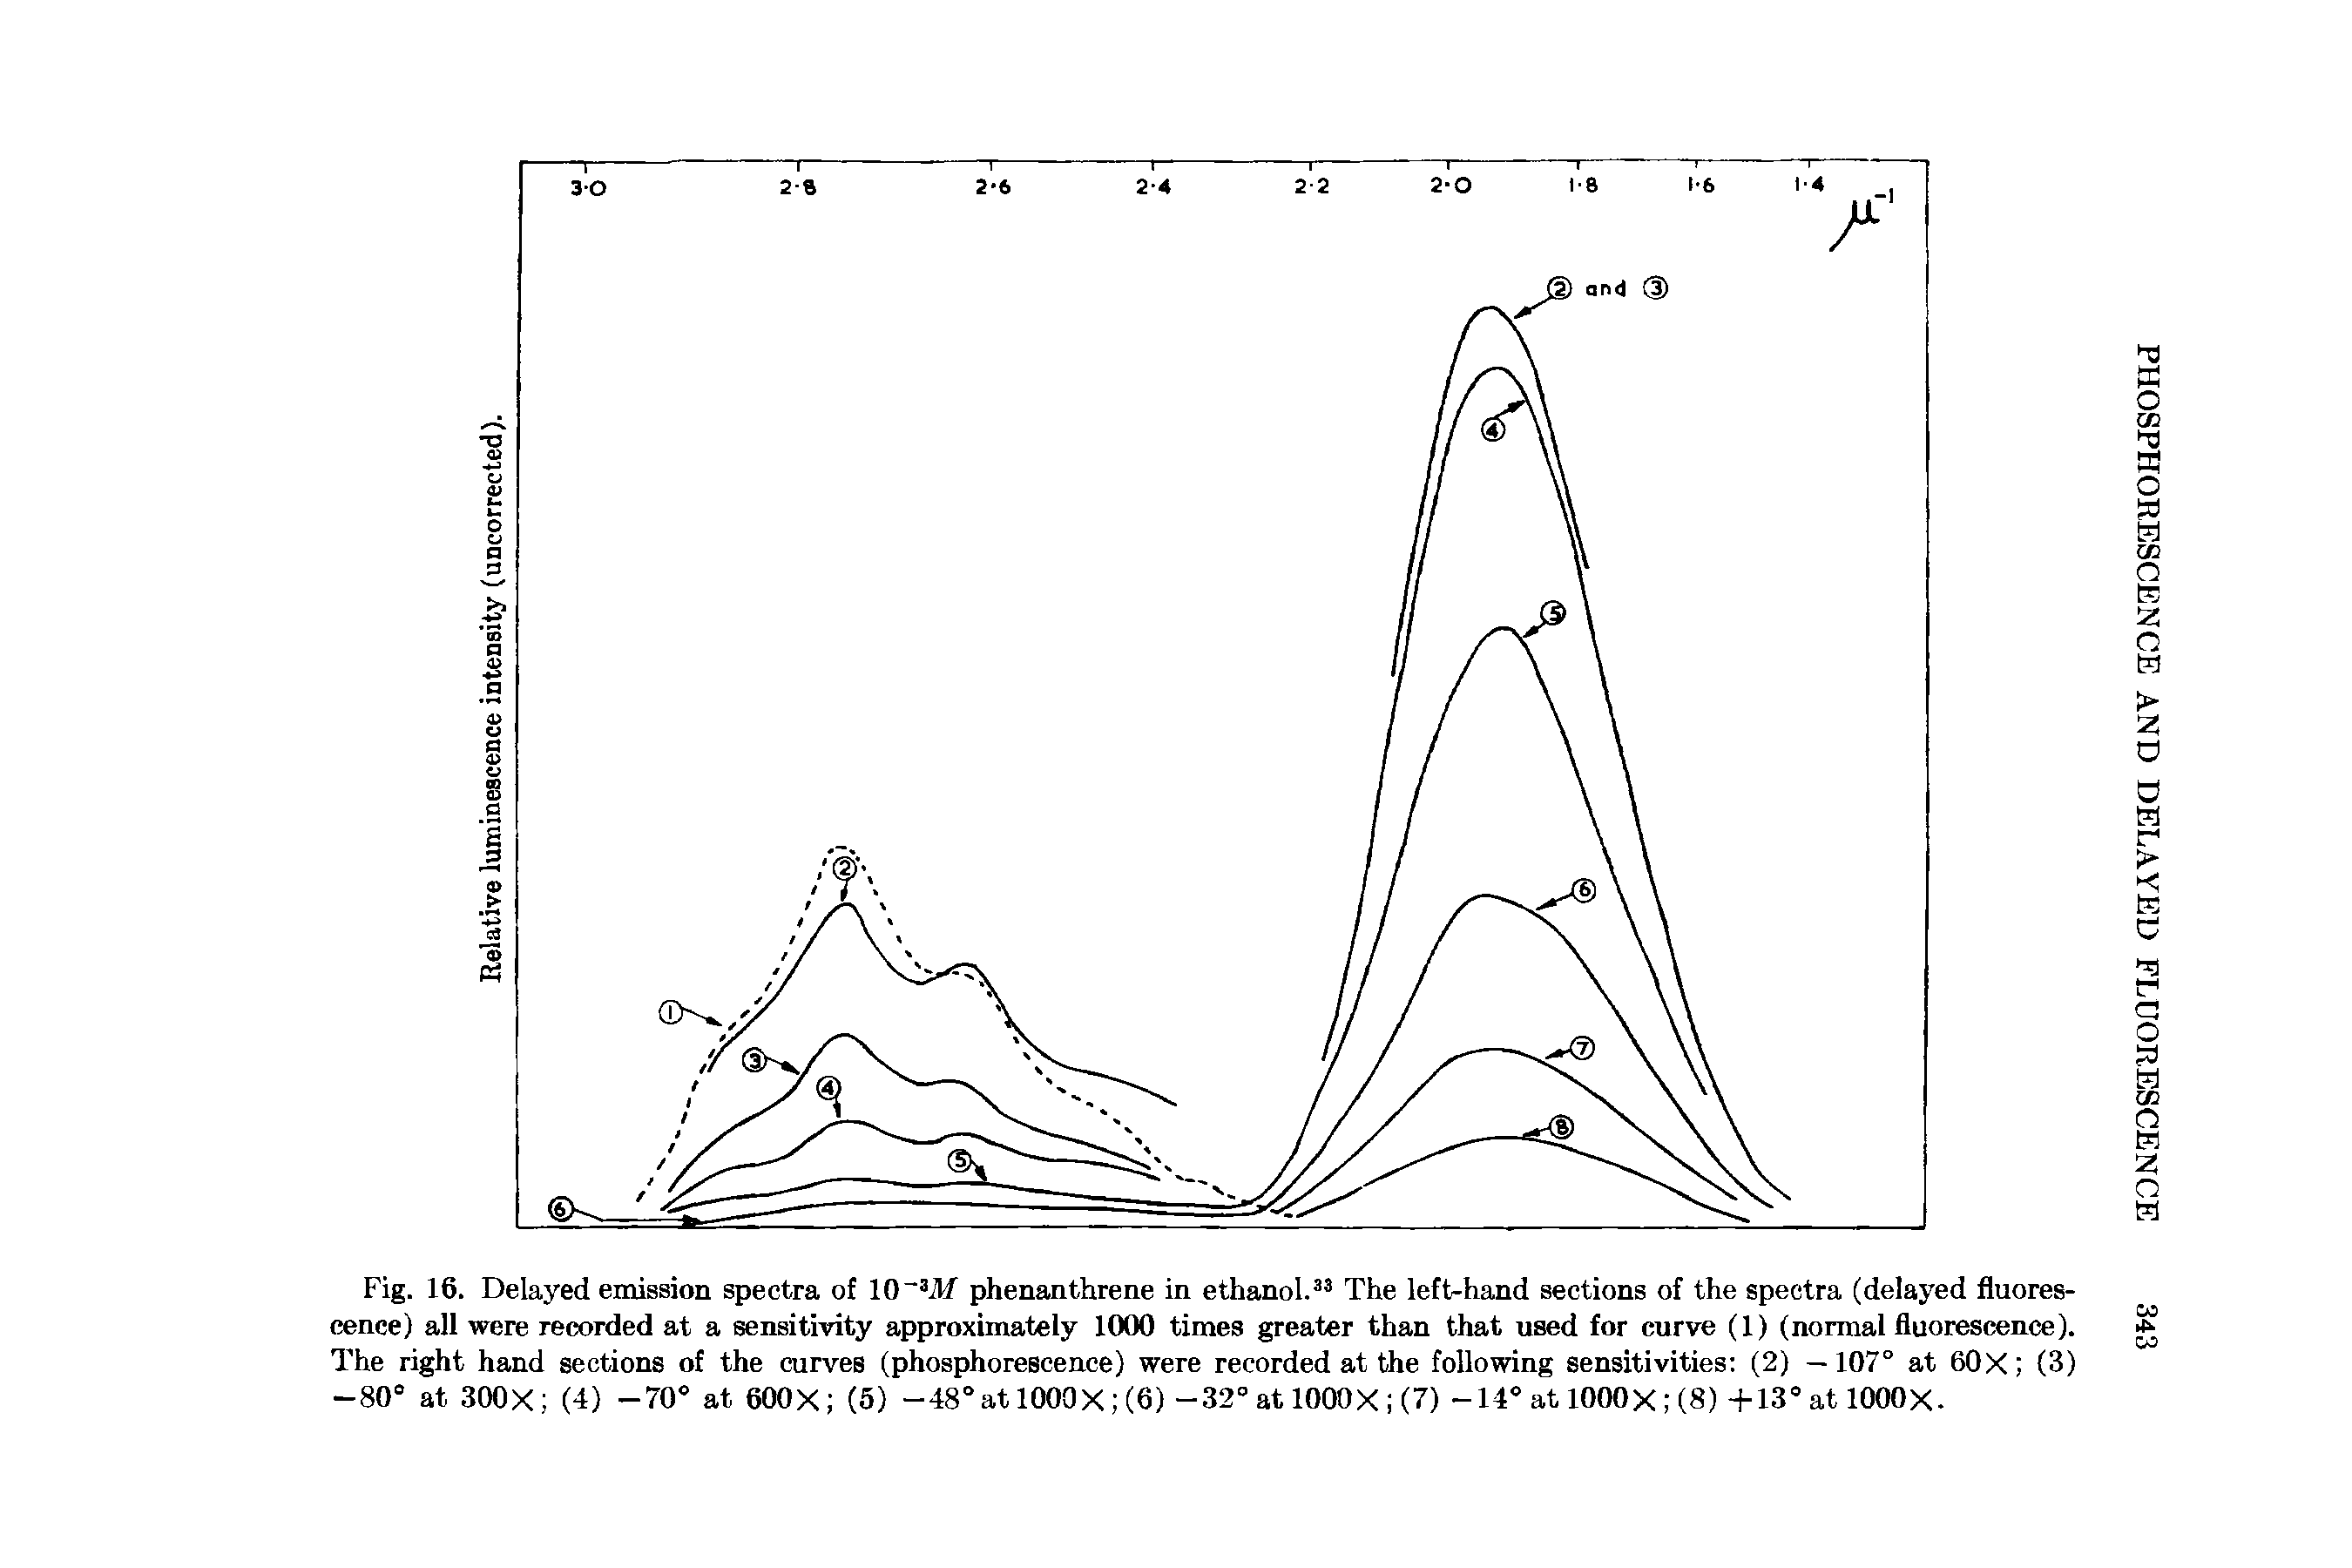 Fig. 16. Delayed emission spectra of 10 3M phenanthrene in ethanol.33 The left-hand sections of the spectra (delayed fluorescence) all were recorded at a sensitivity approximately 1000 times greater than that used for curve (1) (normal fluorescence). The right hand sections of the curves (phosphorescence) were recorded at the following sensitivities (2) —107° at 60X (3)...